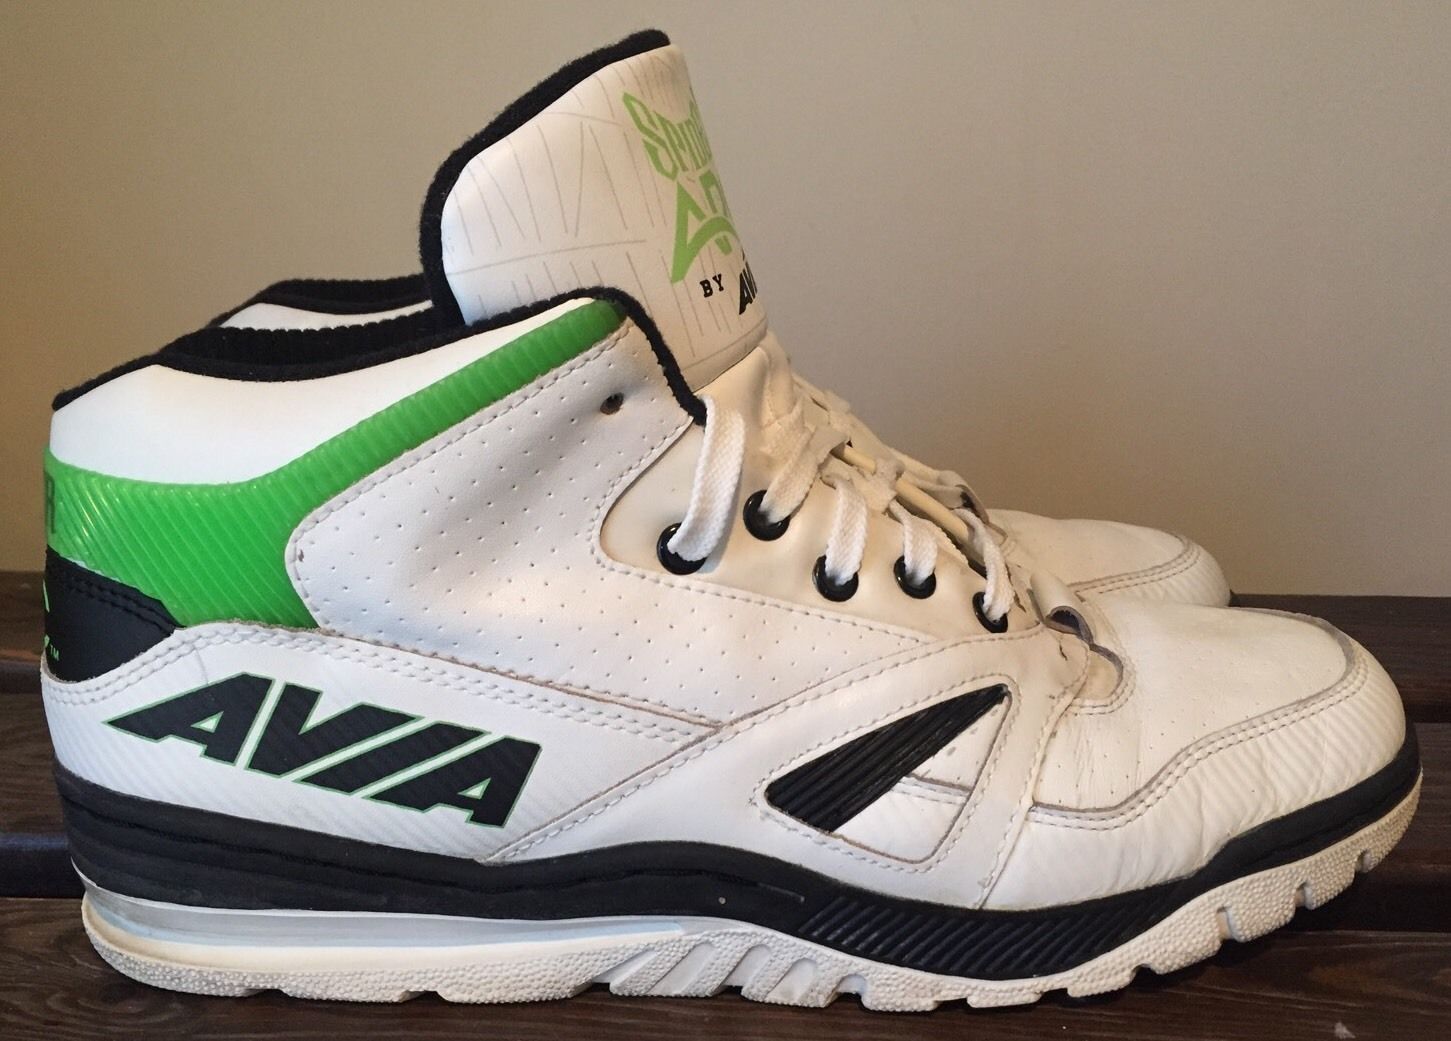 🔥NEWEST ADDITIONS🔥 The legendary 1980s Avia Basketball shoes has